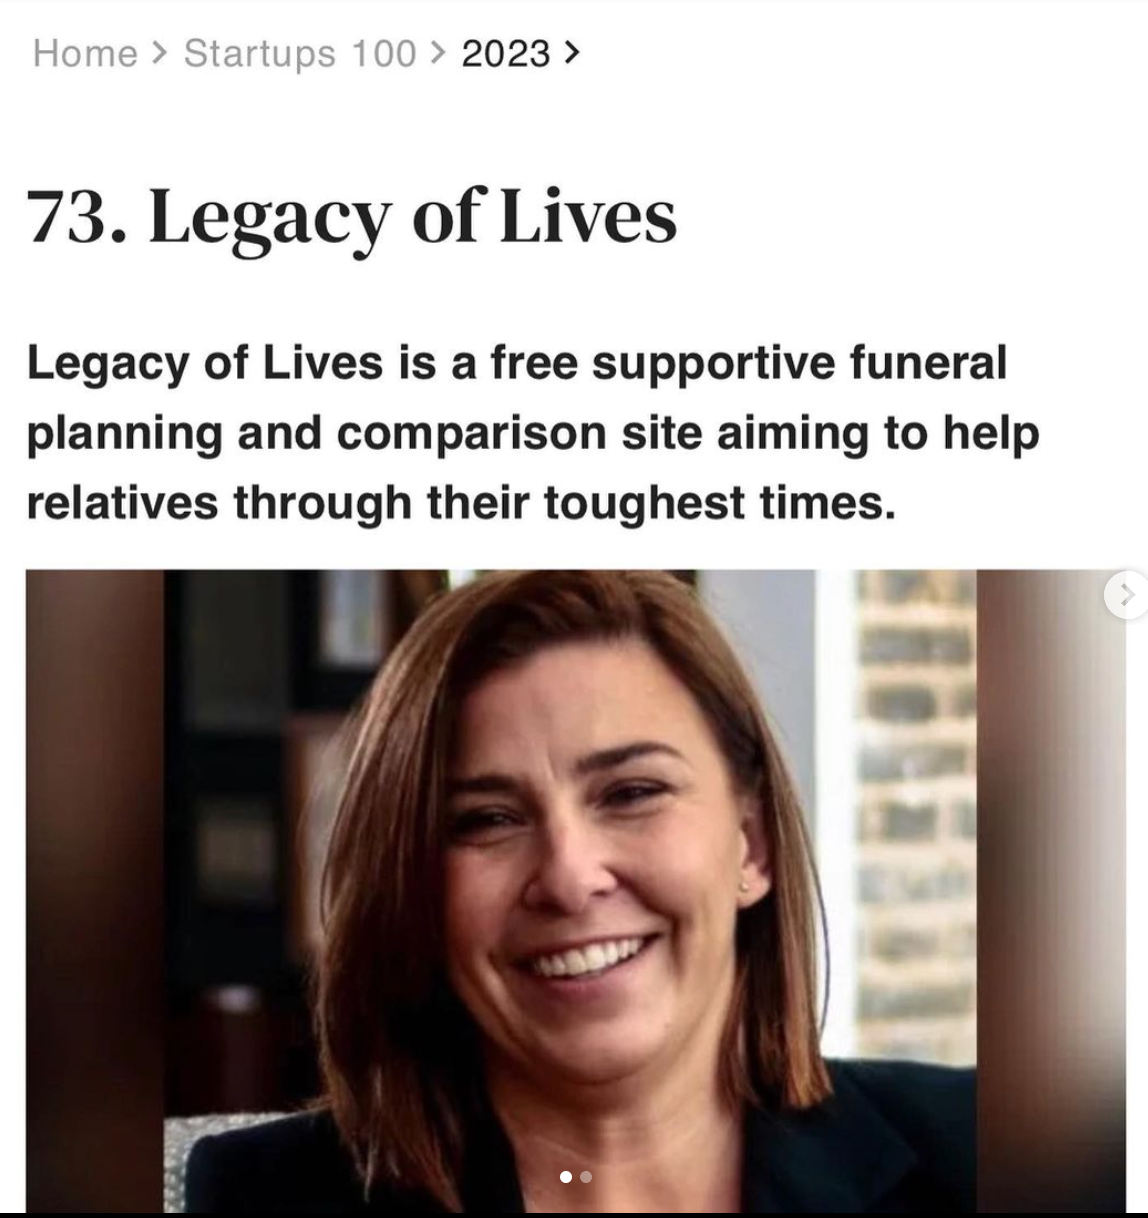 Legacy of Lives is featured in the Startups 100 list for 2023.